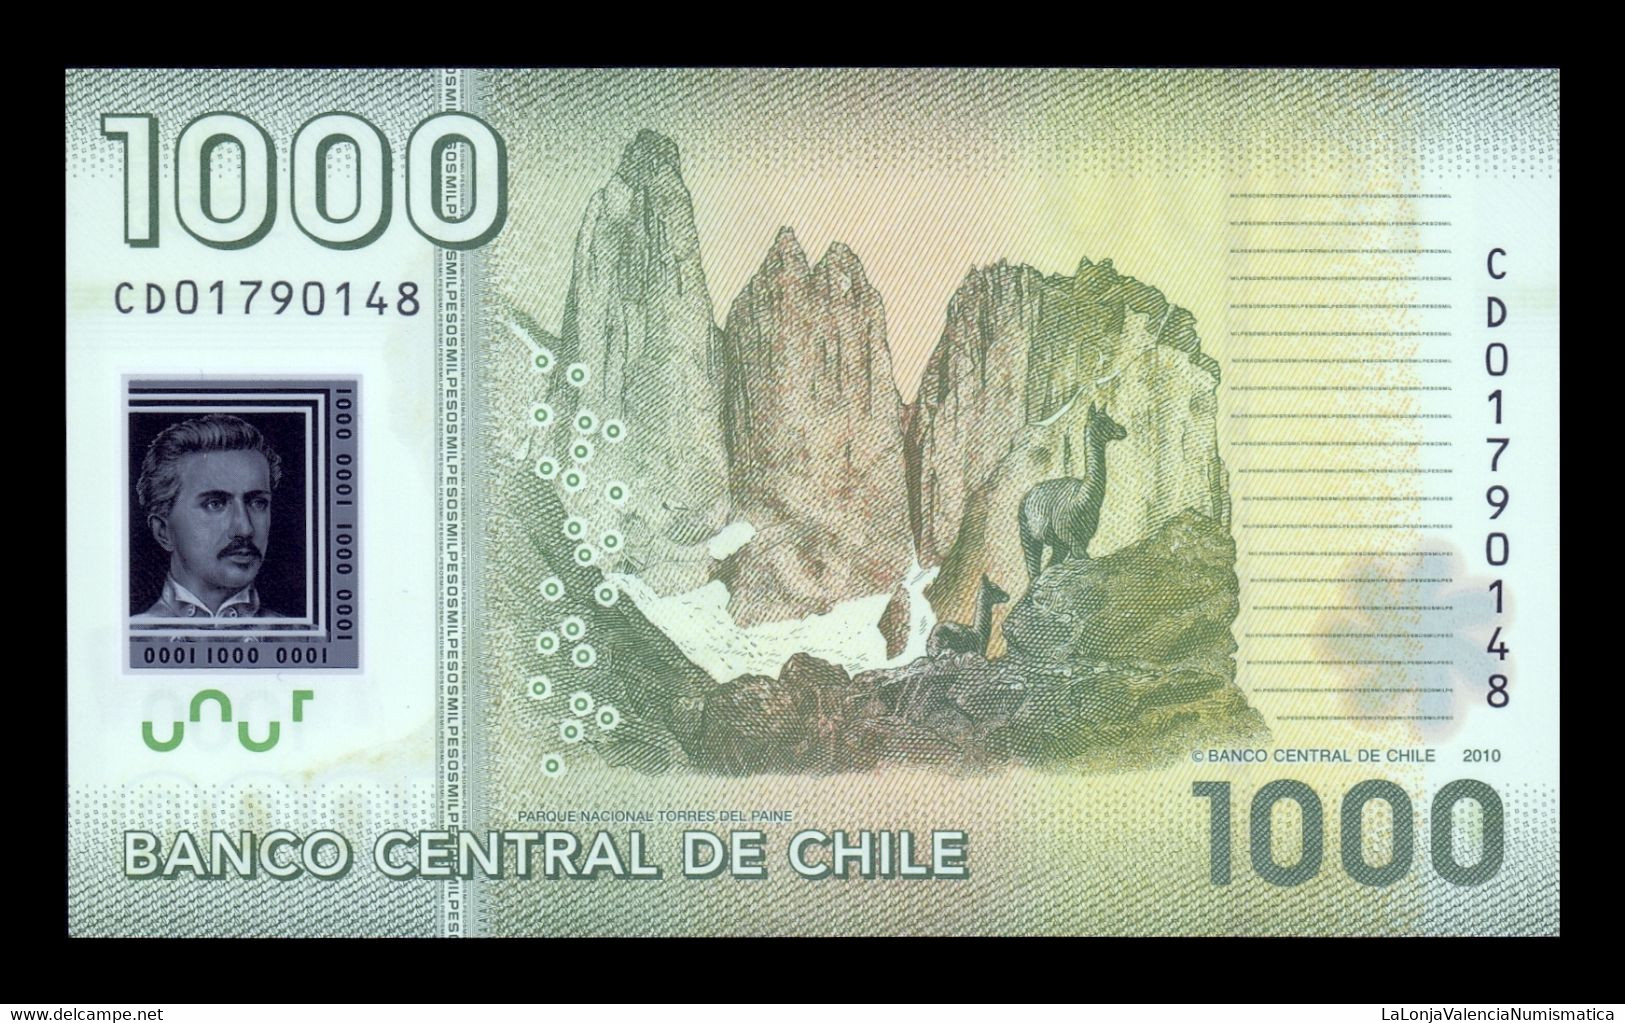 Chile 1000 Pesos 2010 Pick 161a First Date Polymer SC UNC - Chile